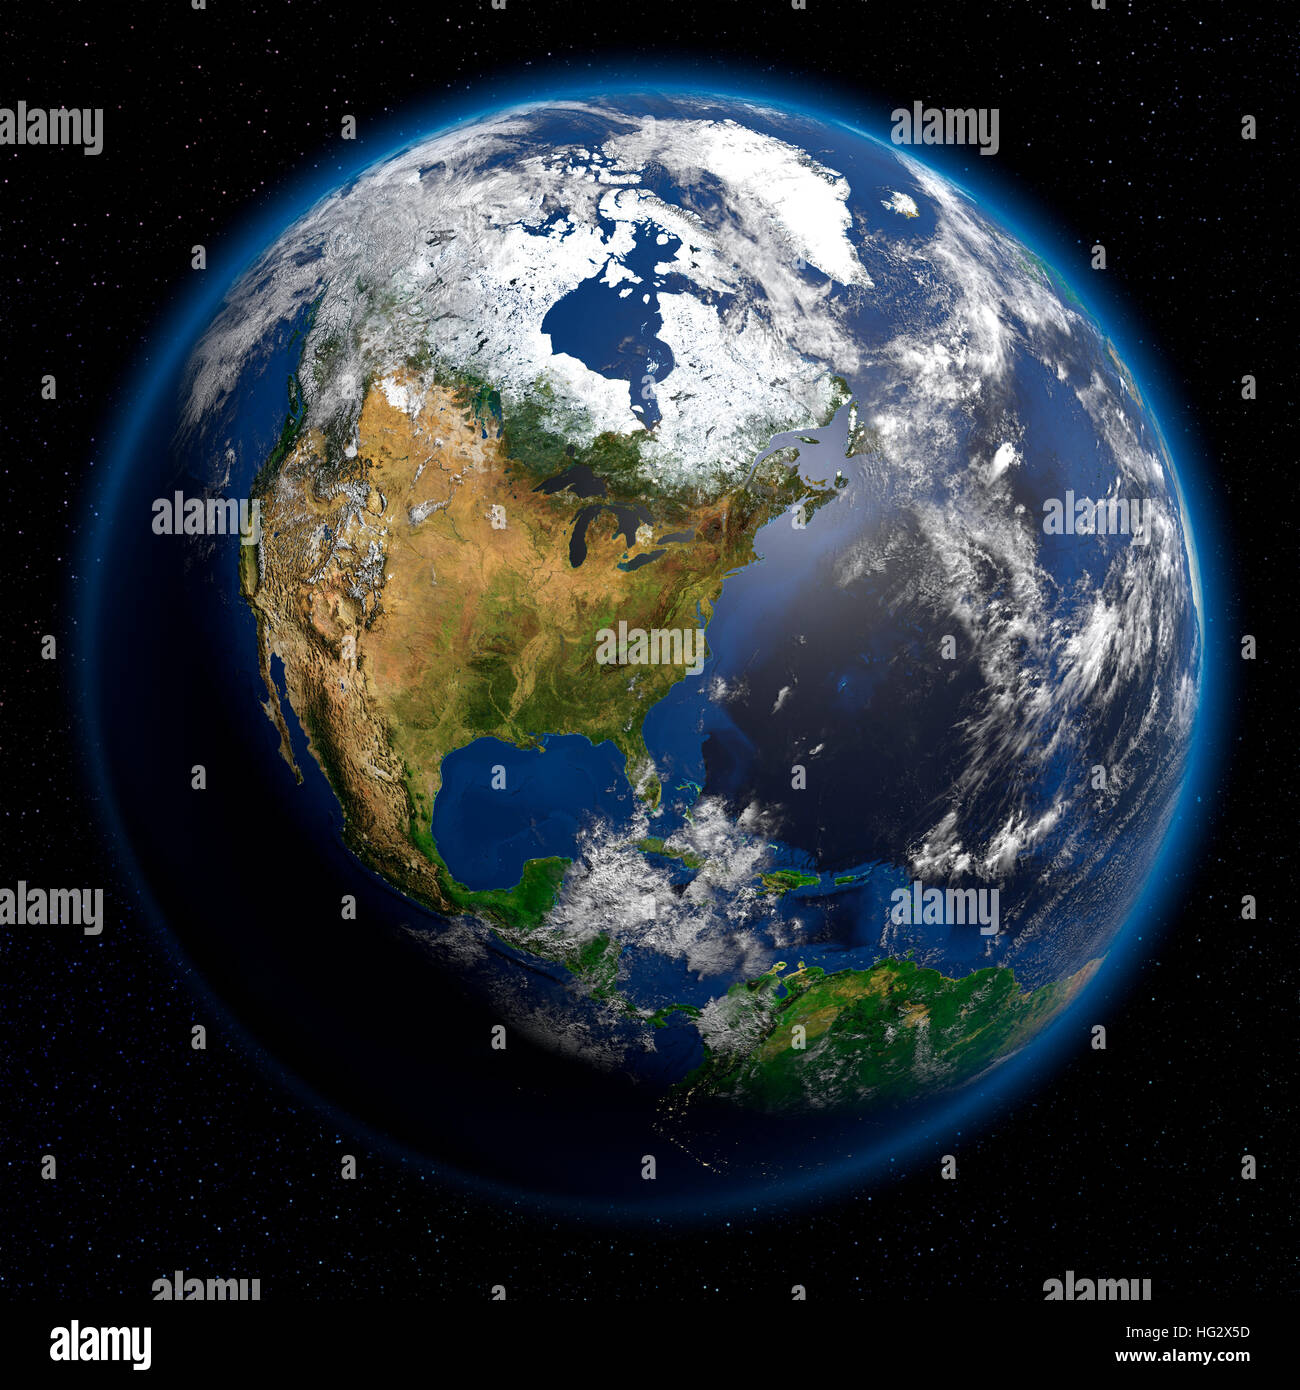 Earth viewed from space showing North America. Realistic digital illustration including relief map hill shading of terrain. Please credit Nasa. Stock Photo